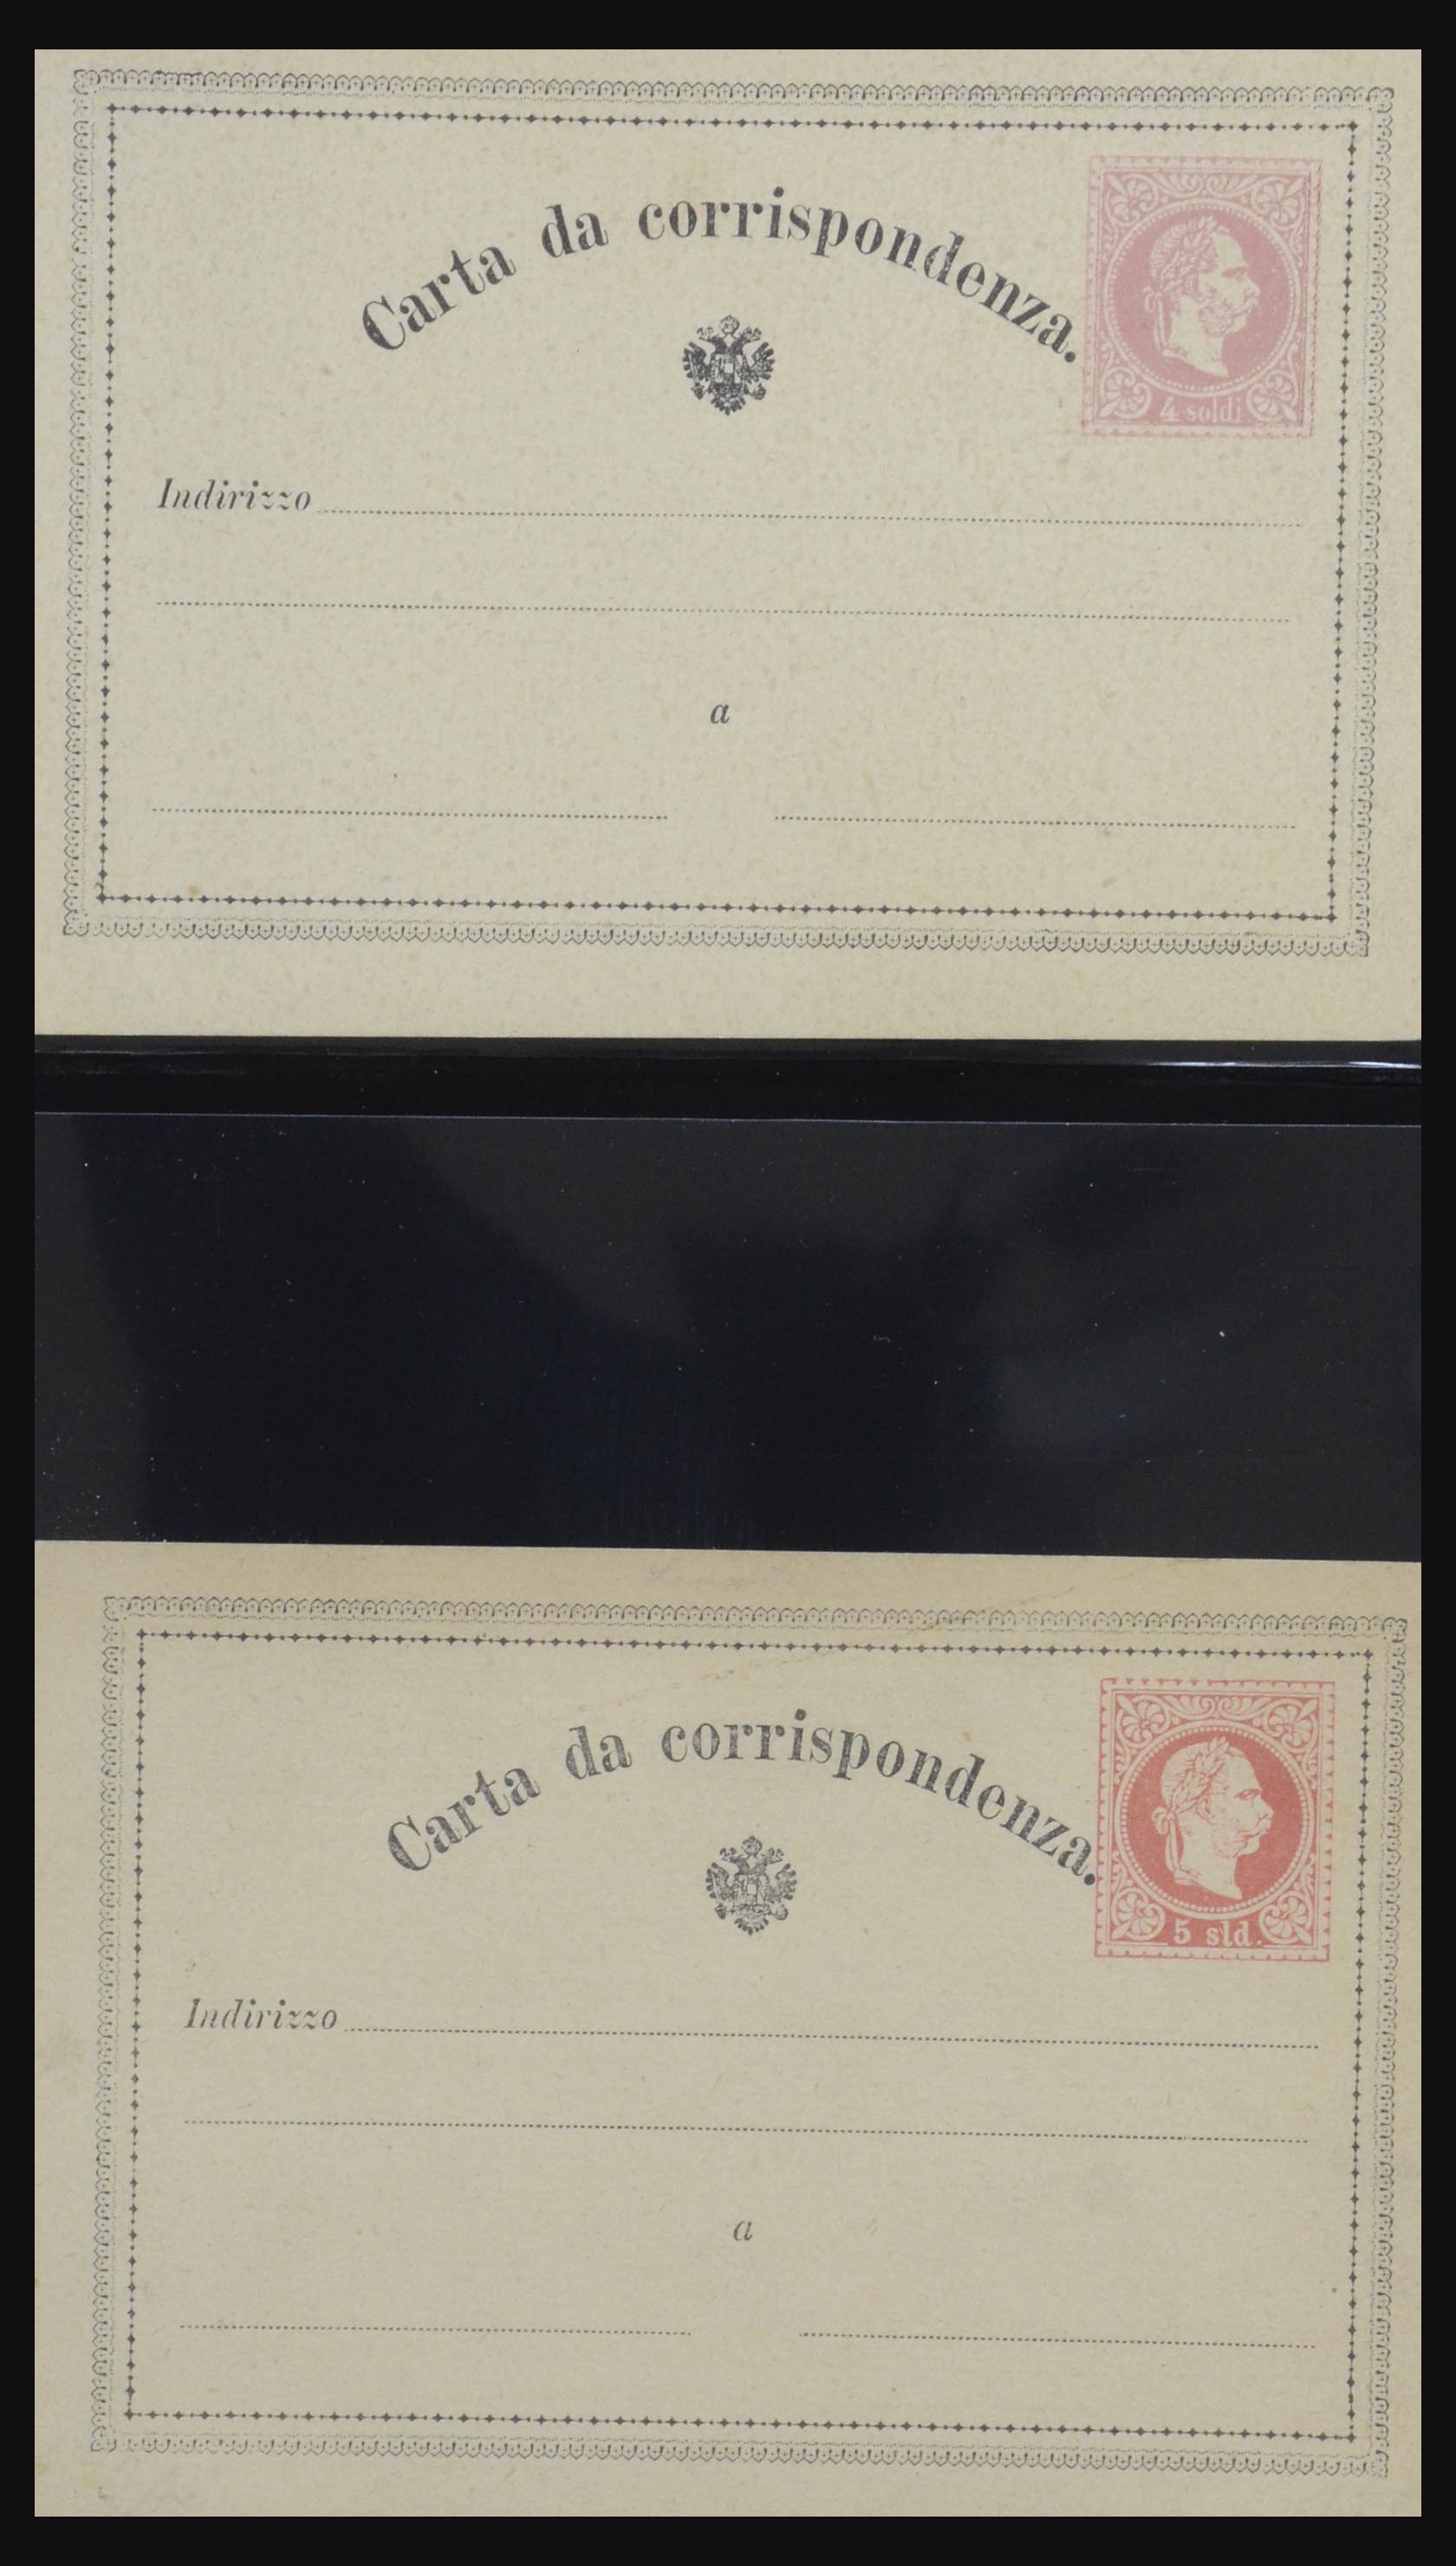 32254 0027 - 32254 Austria covers from 1800.